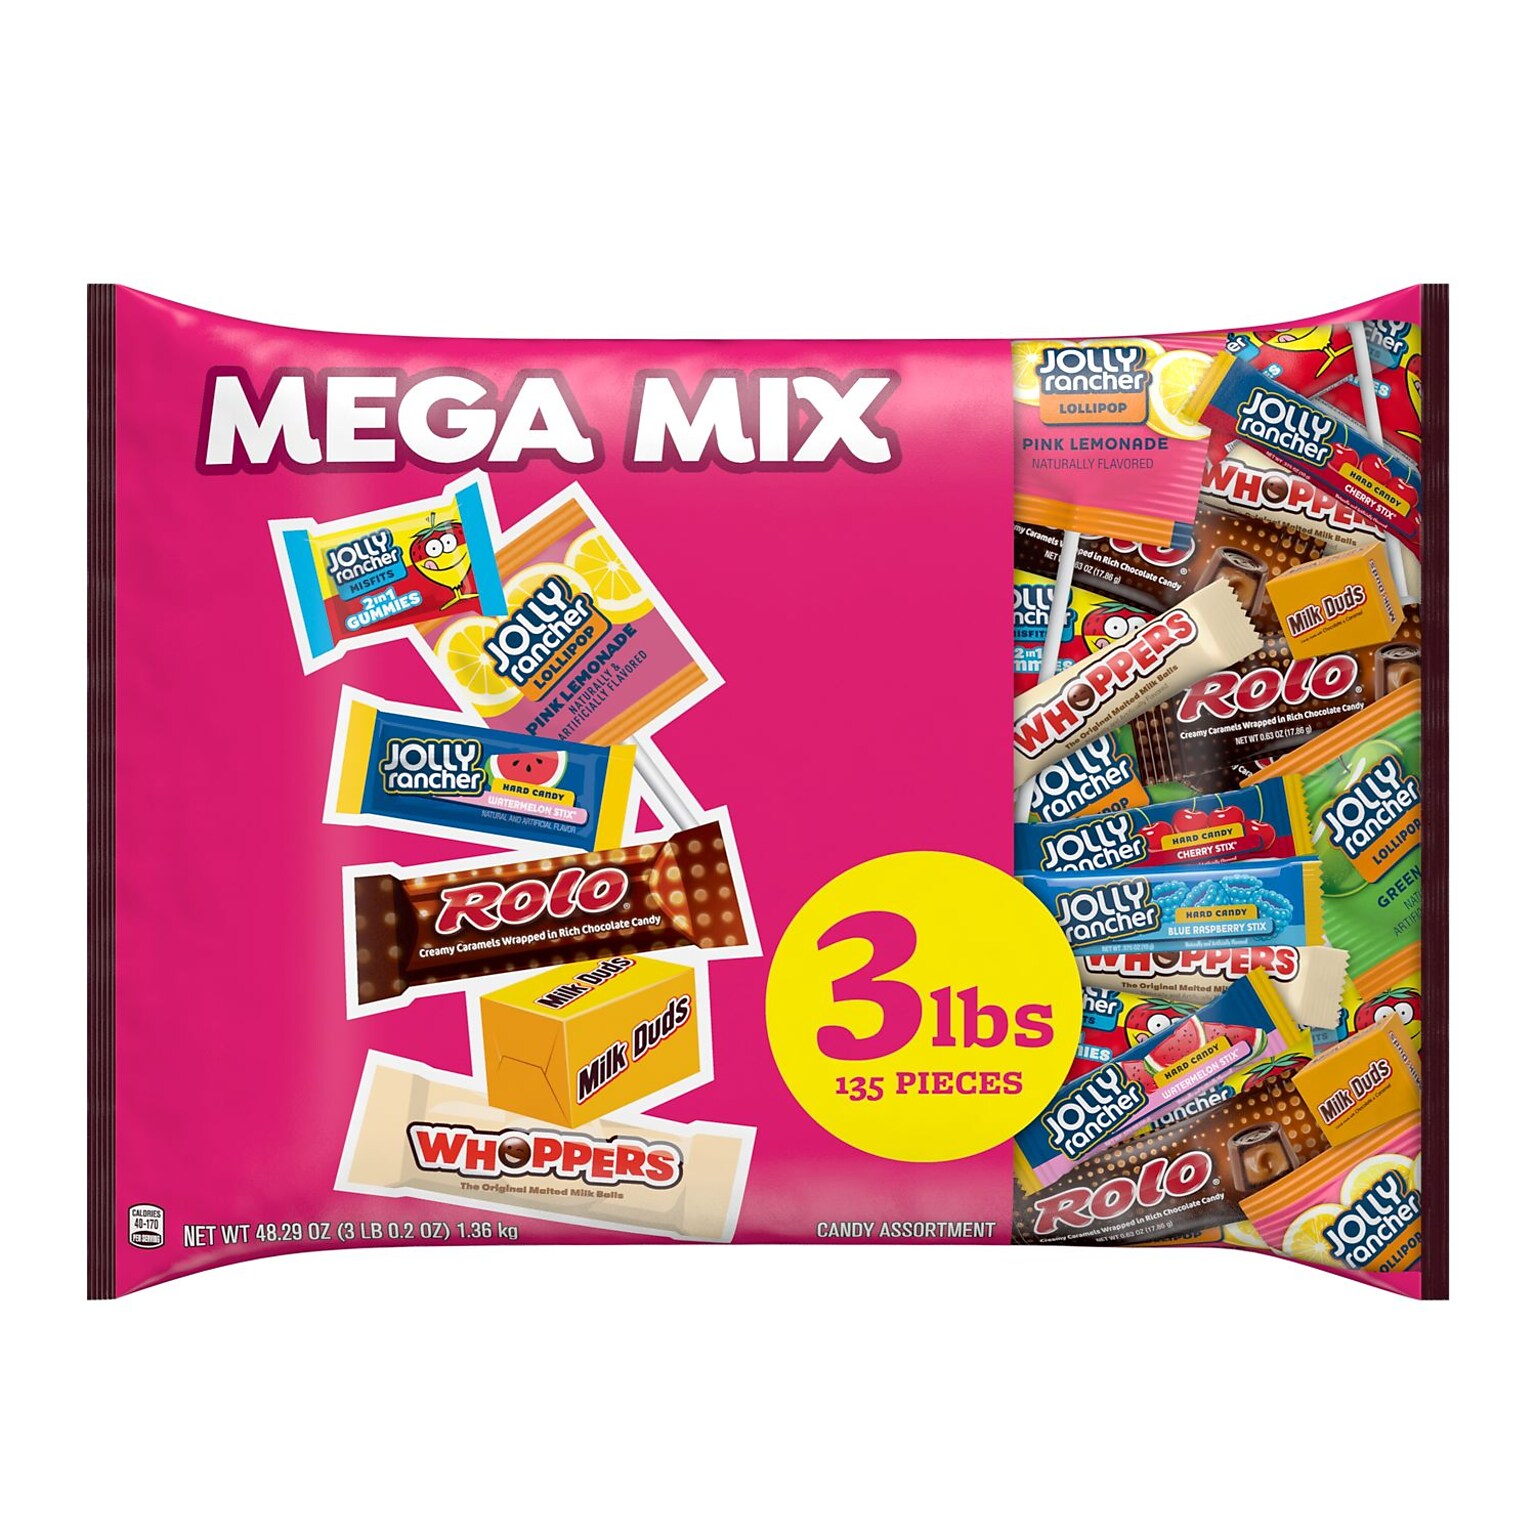 Hersheys Mega Mix Chocolate and Sweets Assortment Variety, 48.29 oz., 135 Pieces (HEC93958)